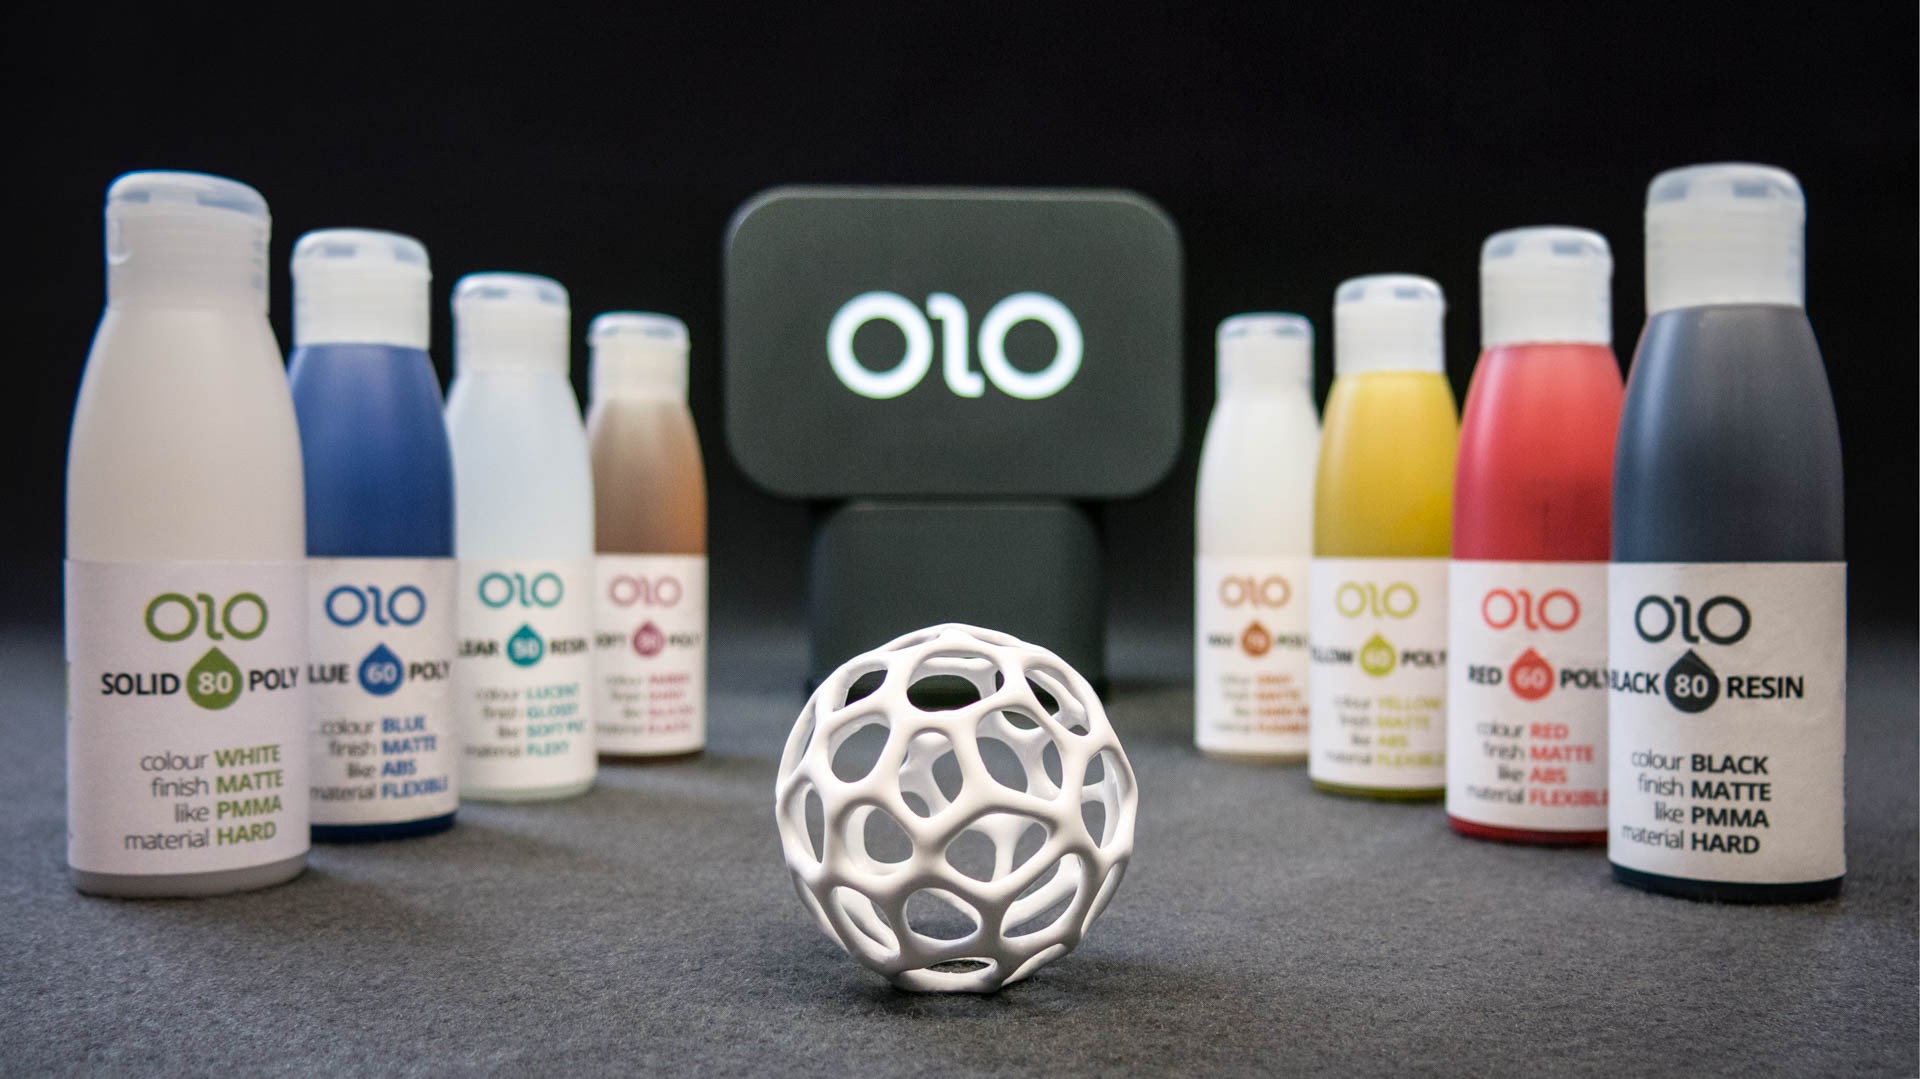 OLO is the first portable 3D printer that works with your cell phone screen